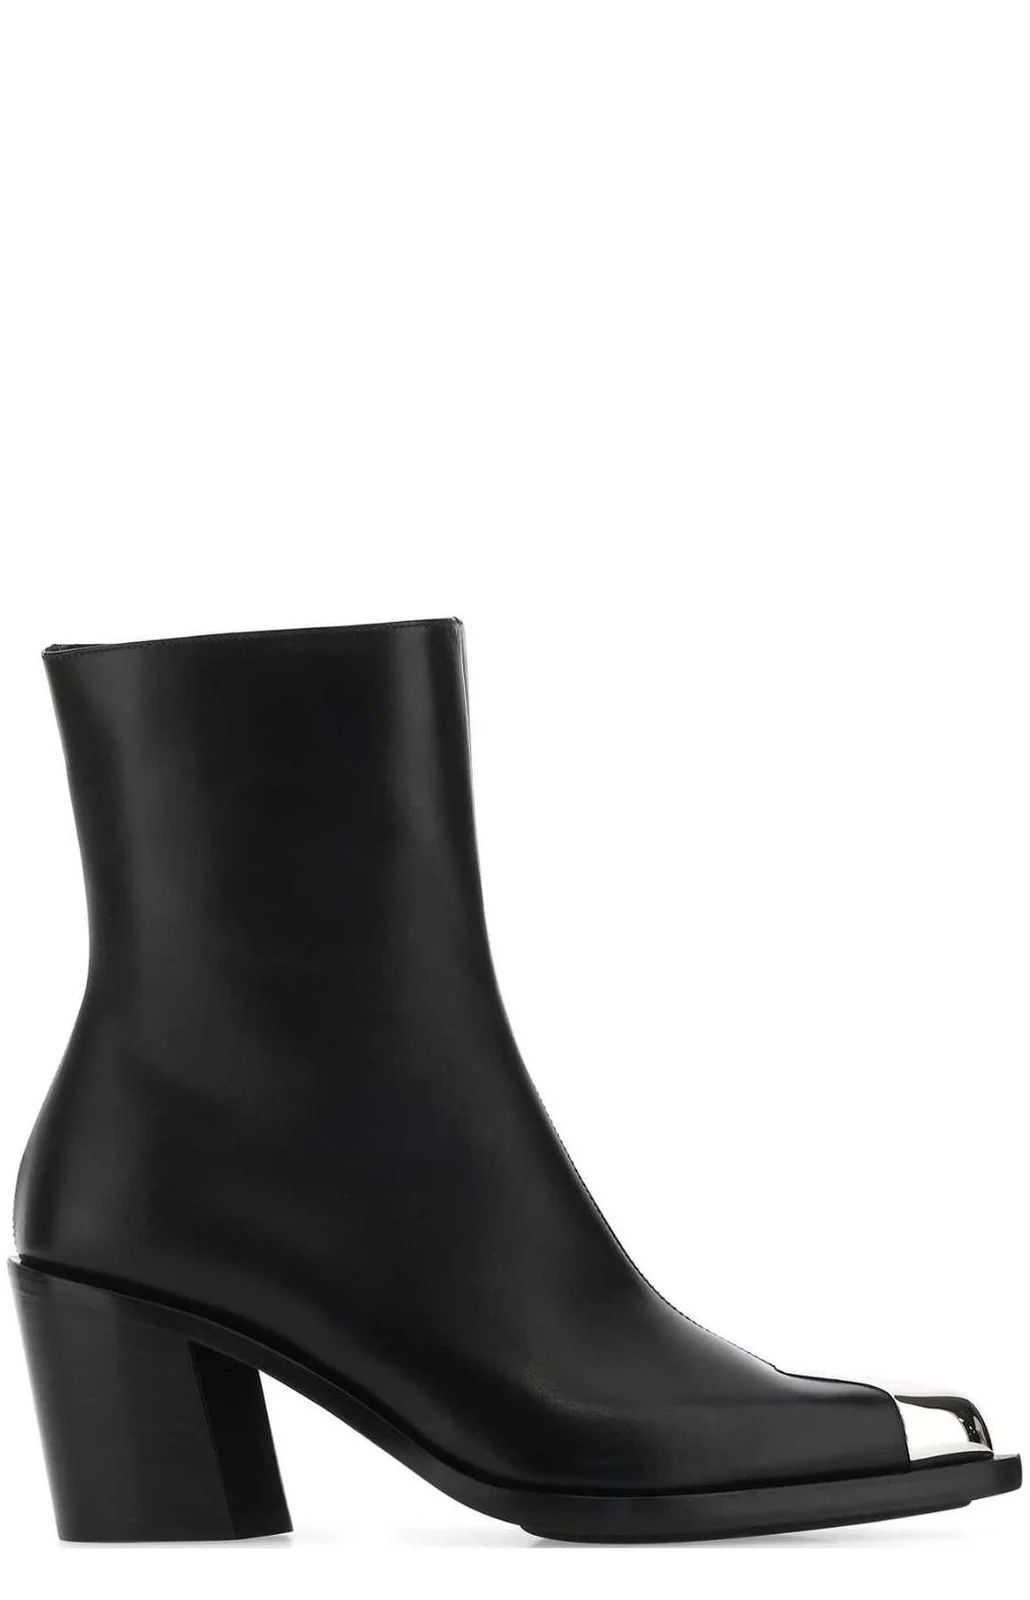 Alexander mcQueen Pointed Toe Boots | Cettire Global